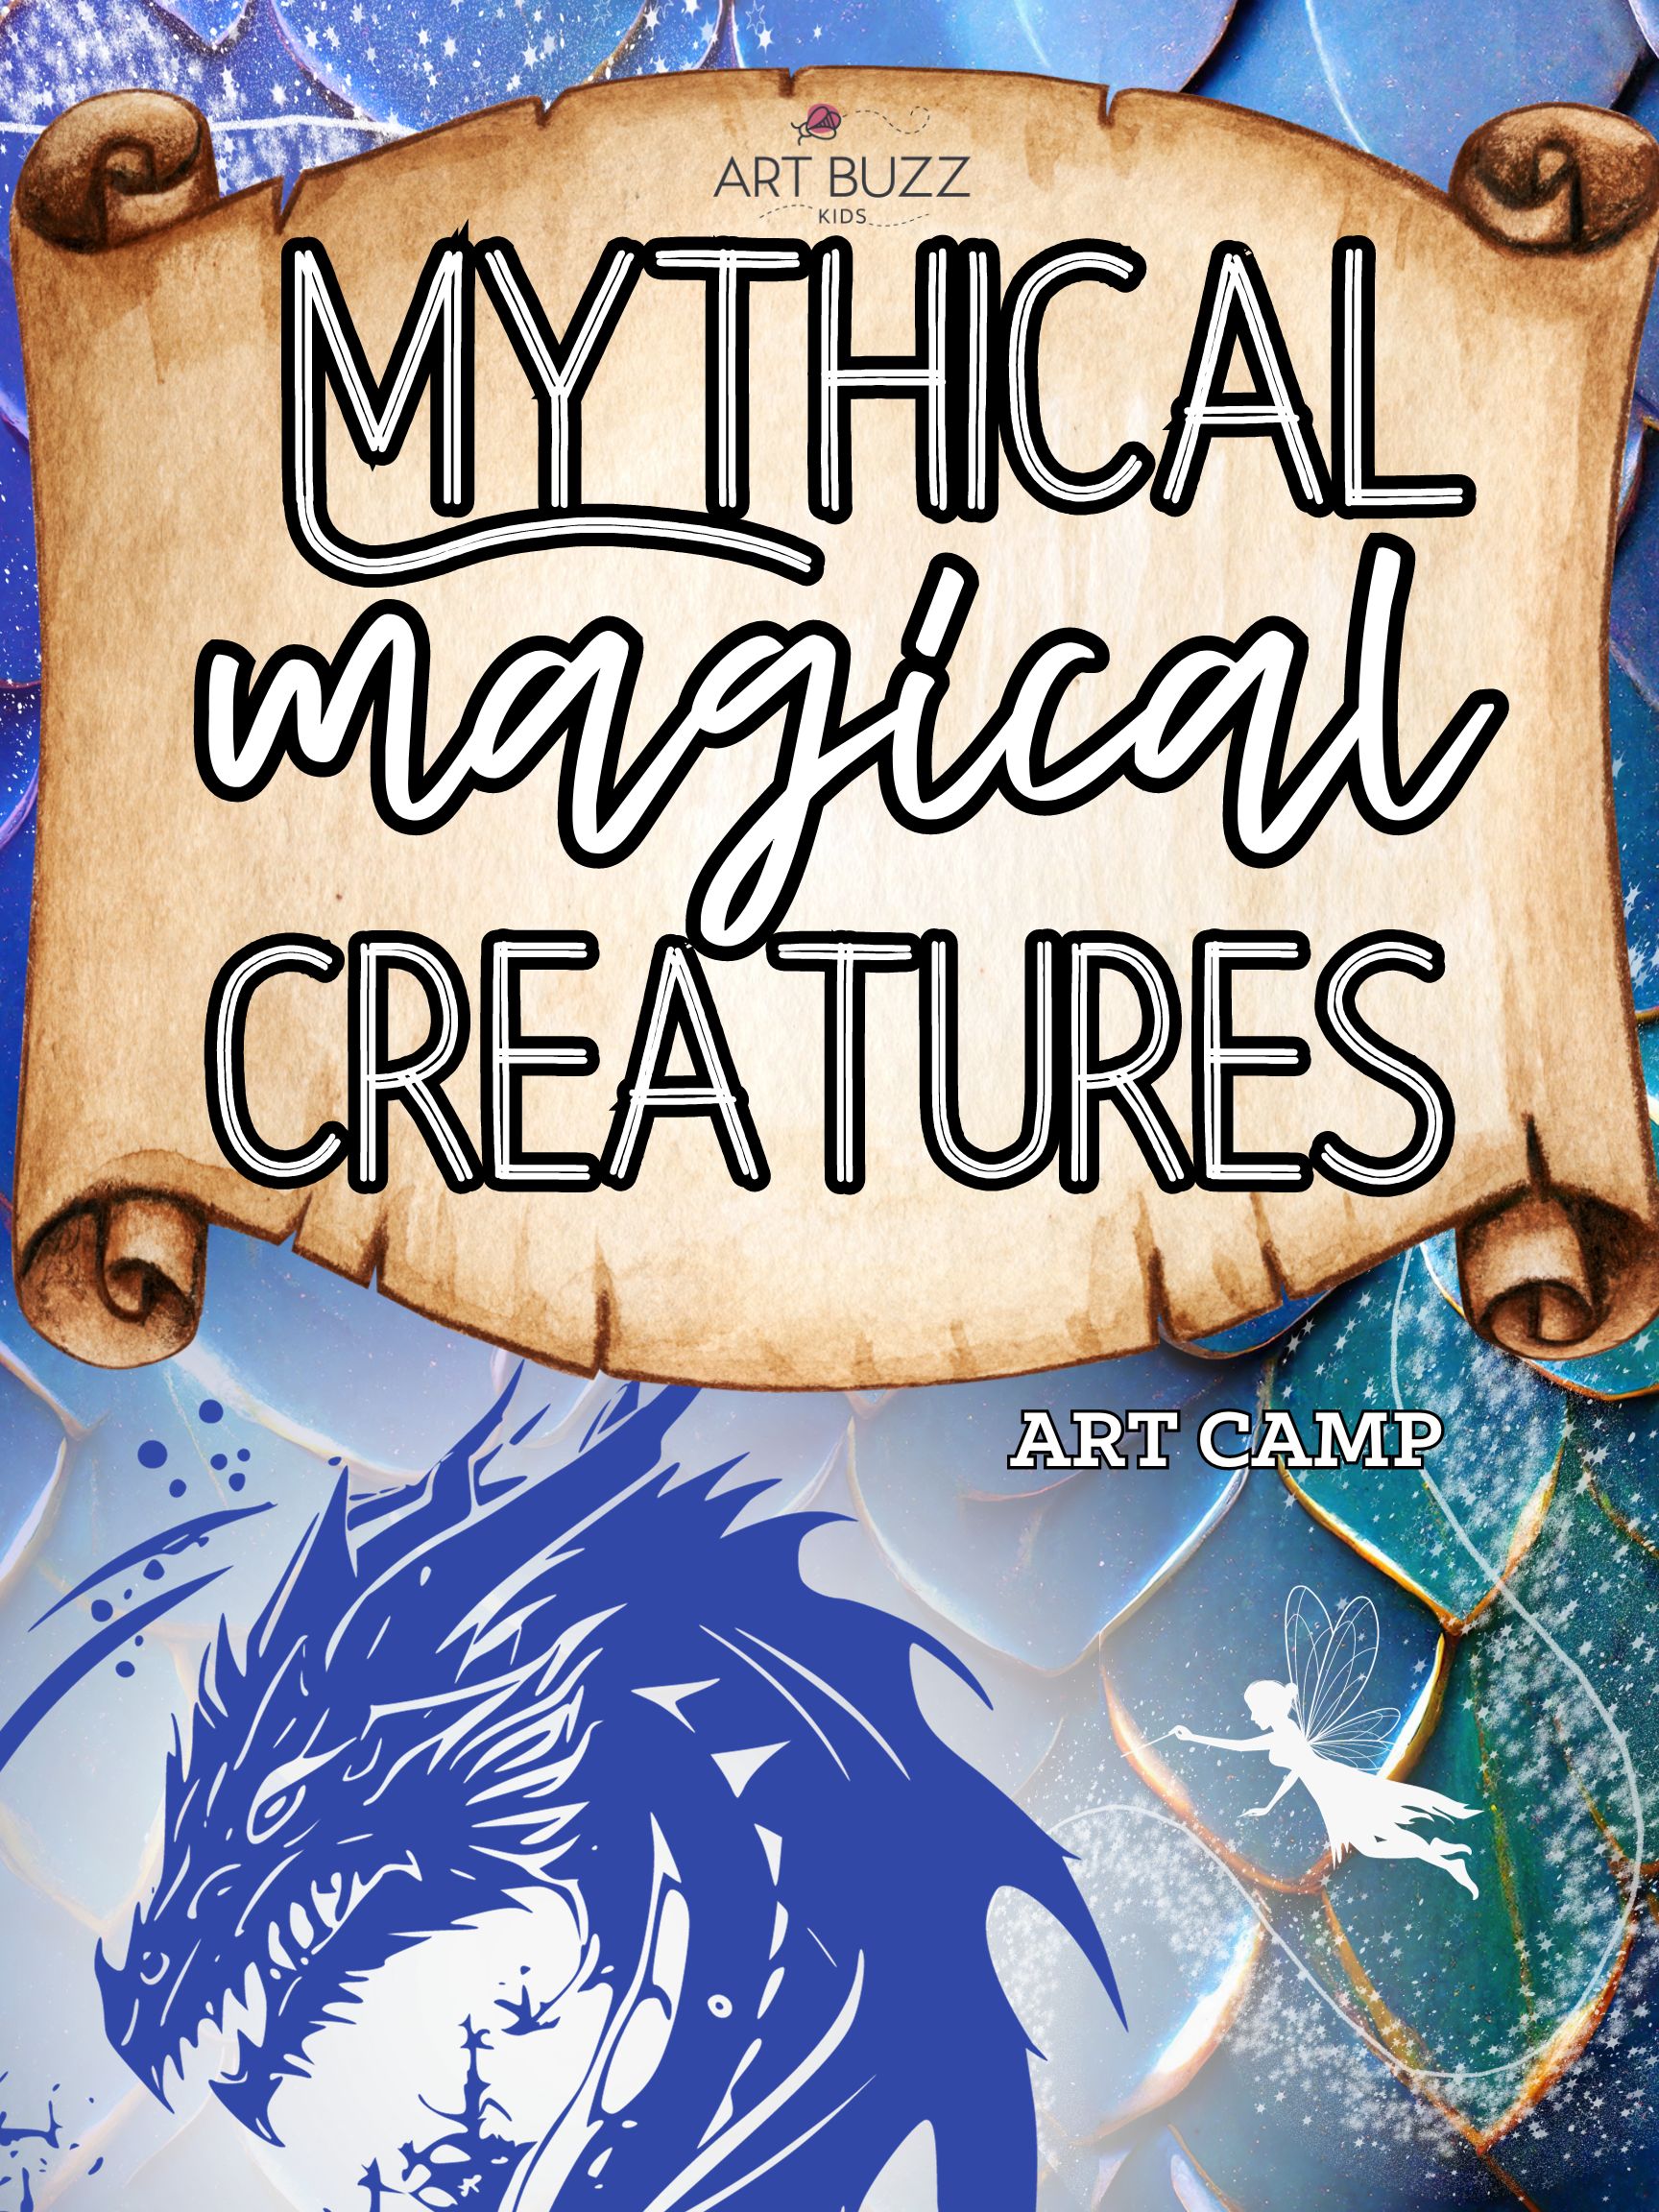 Mythical, Magical Creatures 3-Day Art Camp